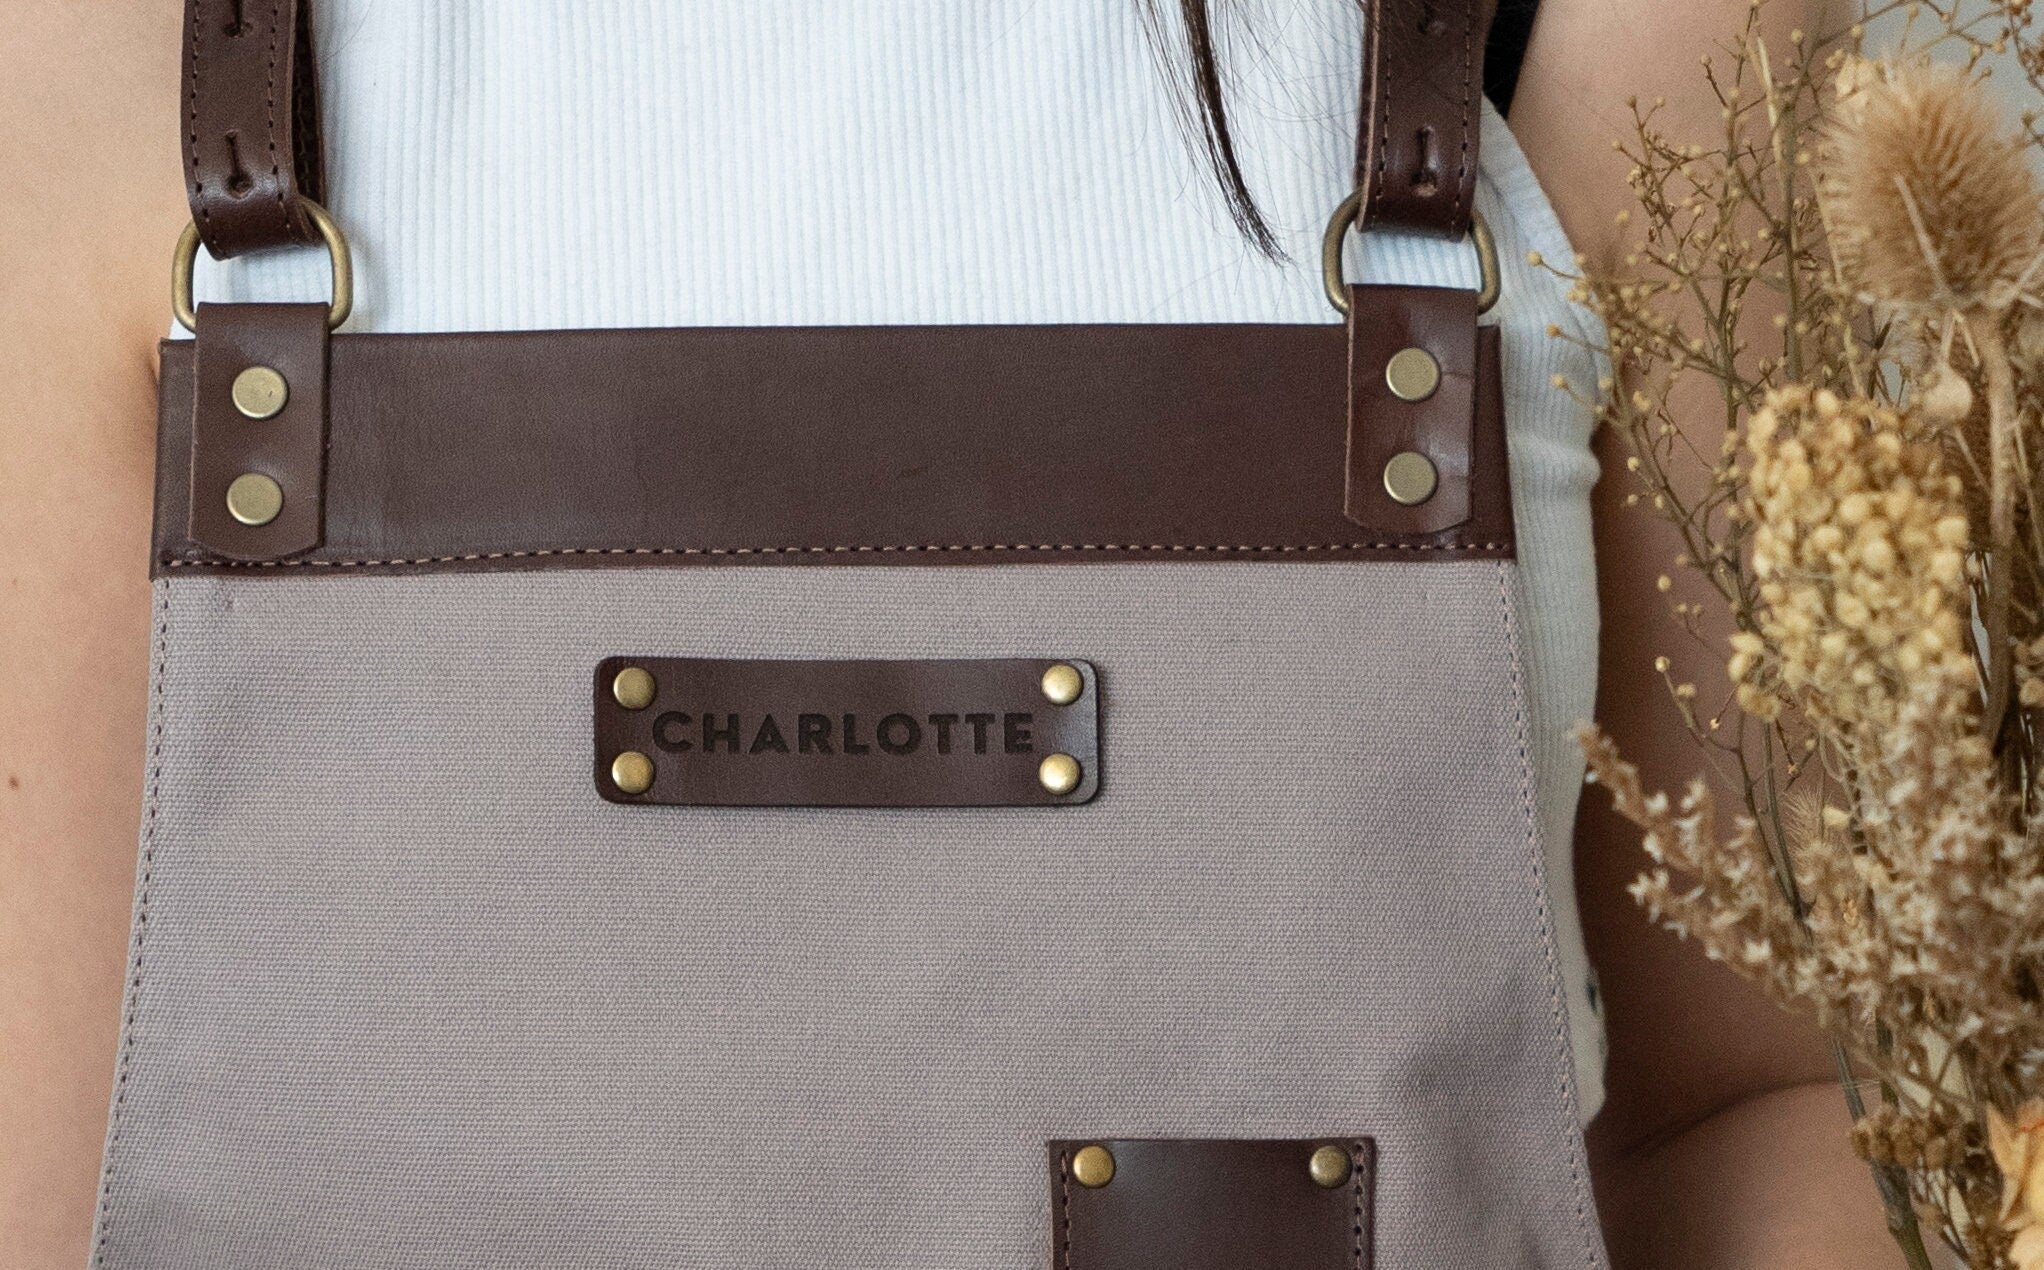 Gaucholife Personalized Canvas and Leather Apron